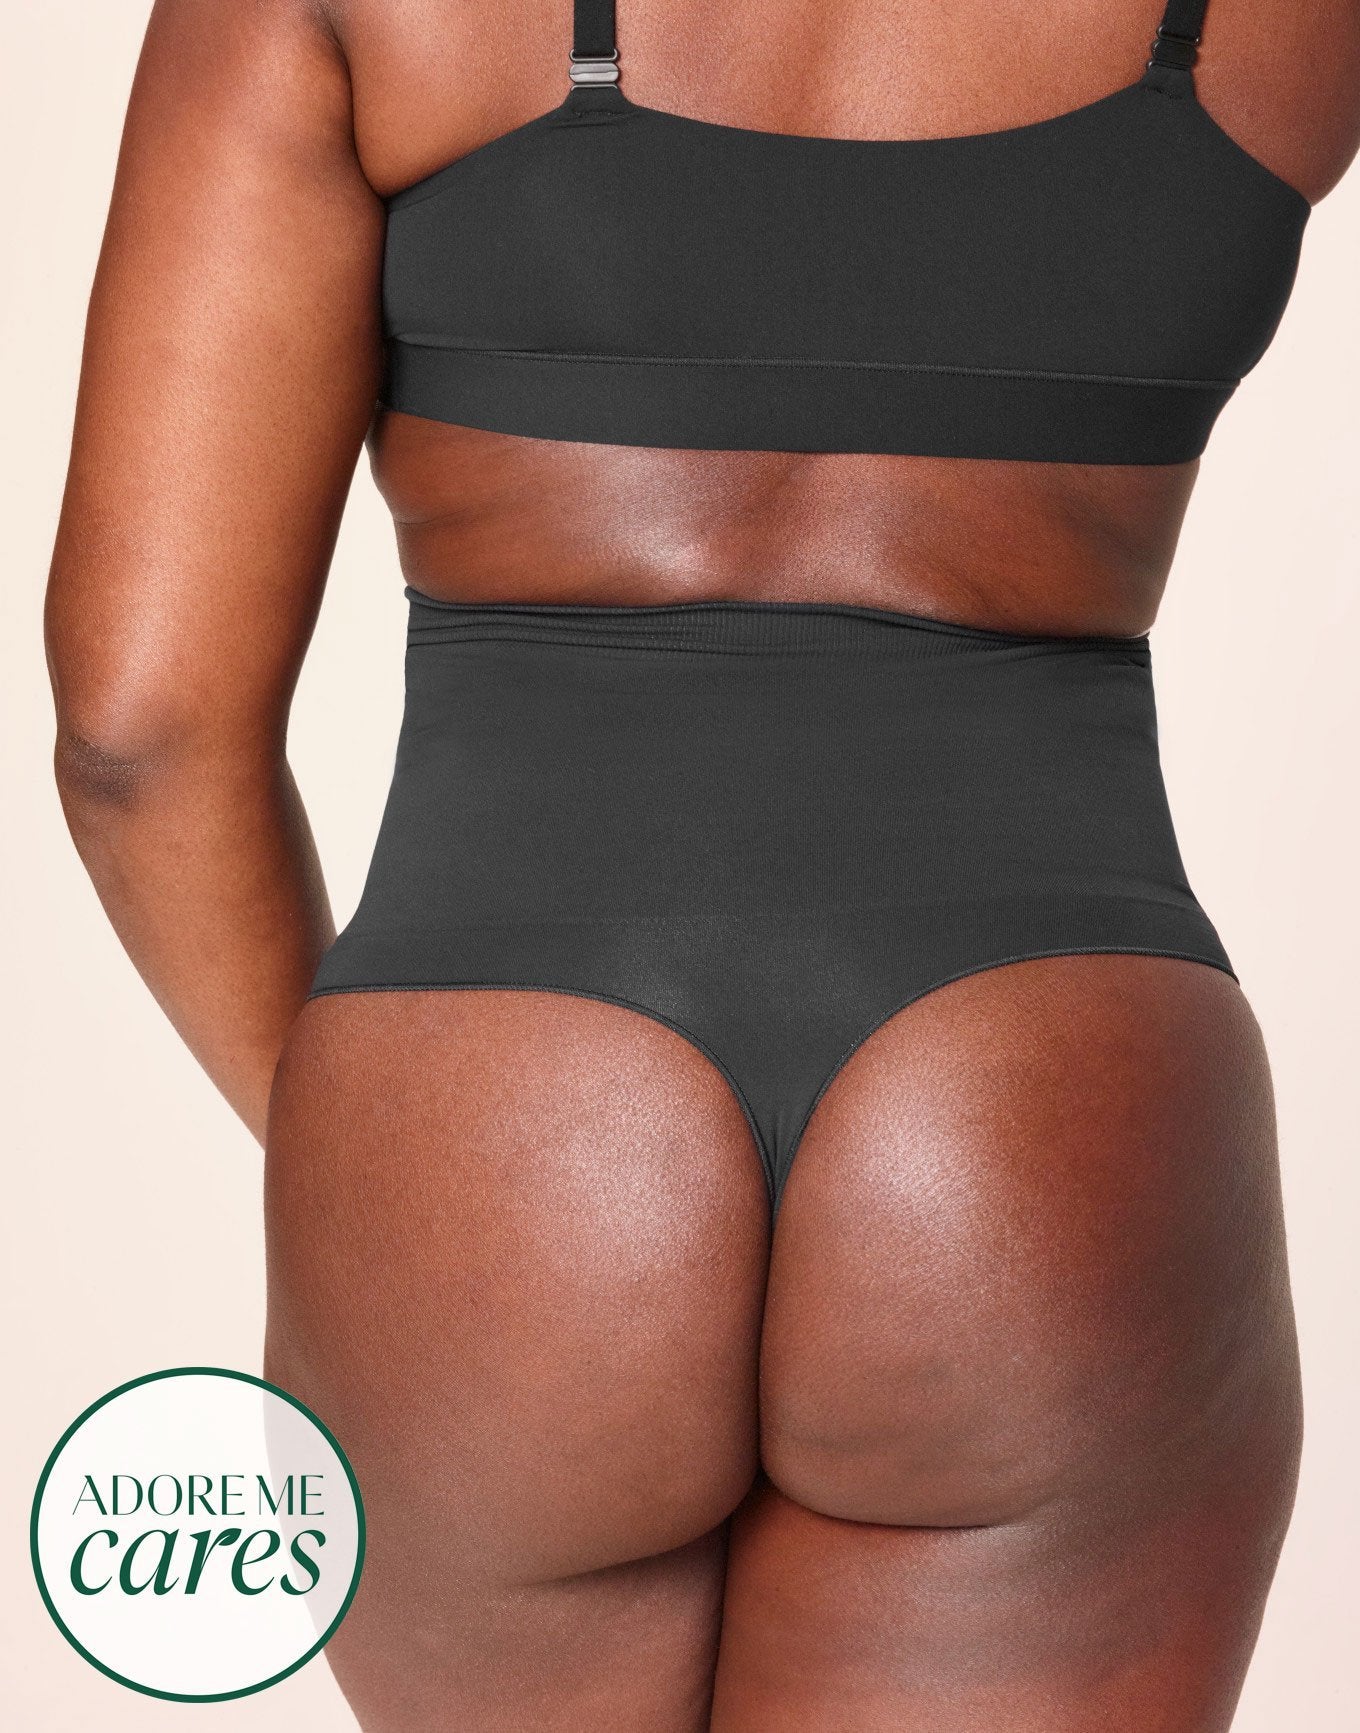 nueskin Elodie High-Compression High-Waist Thong in color Jet Black and shape thong